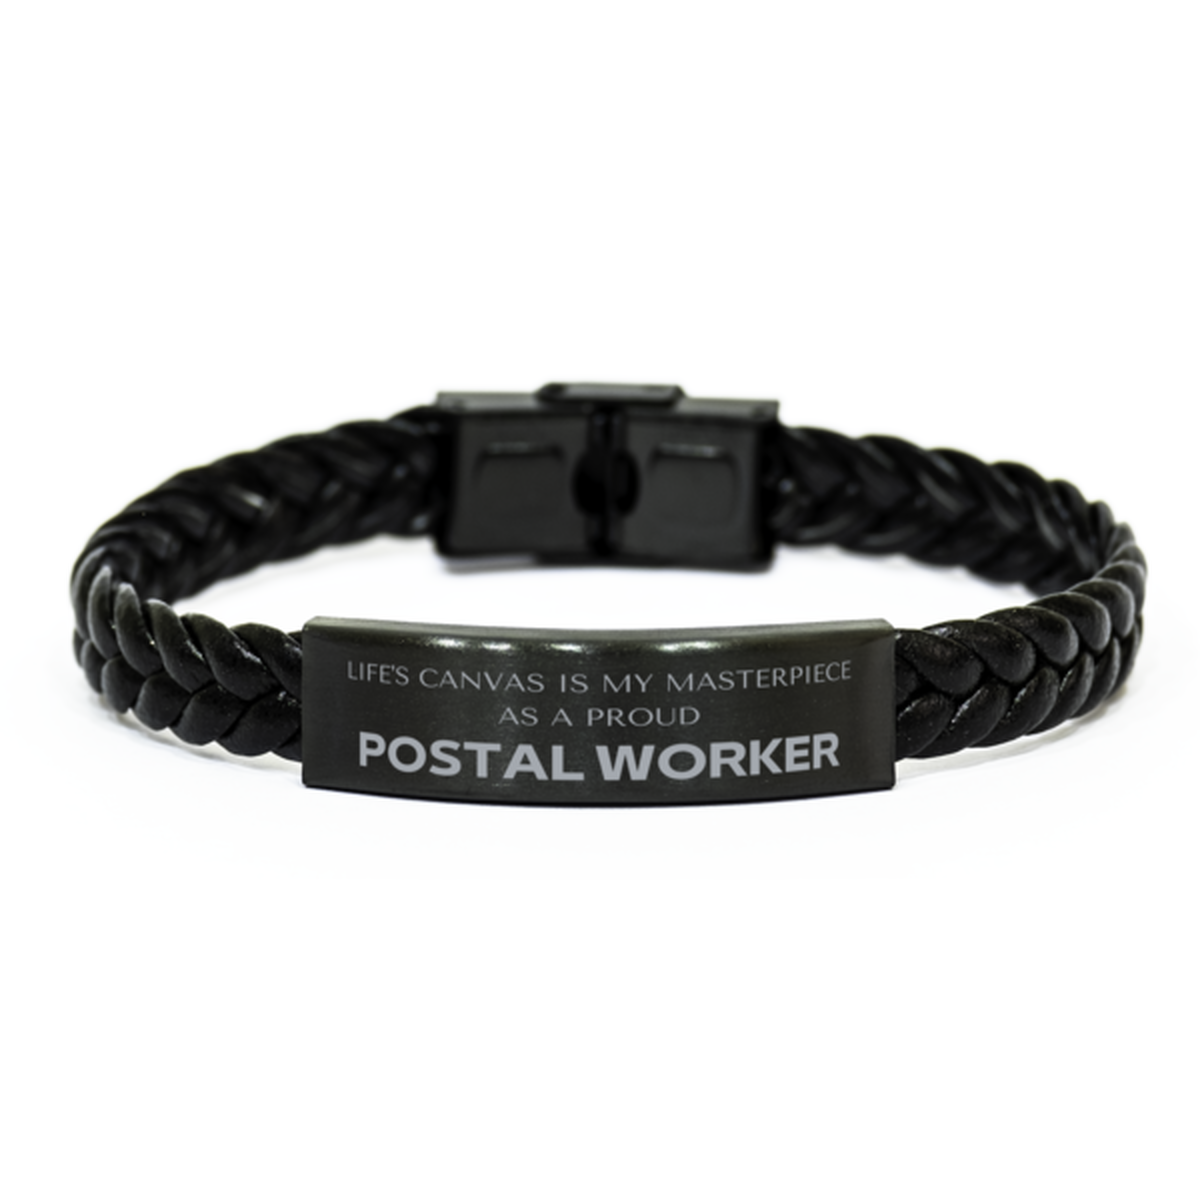 Proud Postal Worker Gifts, Life's canvas is my masterpiece, Epic Birthday Christmas Unique Braided Leather Bracelet For Postal Worker, Coworkers, Men, Women, Friends